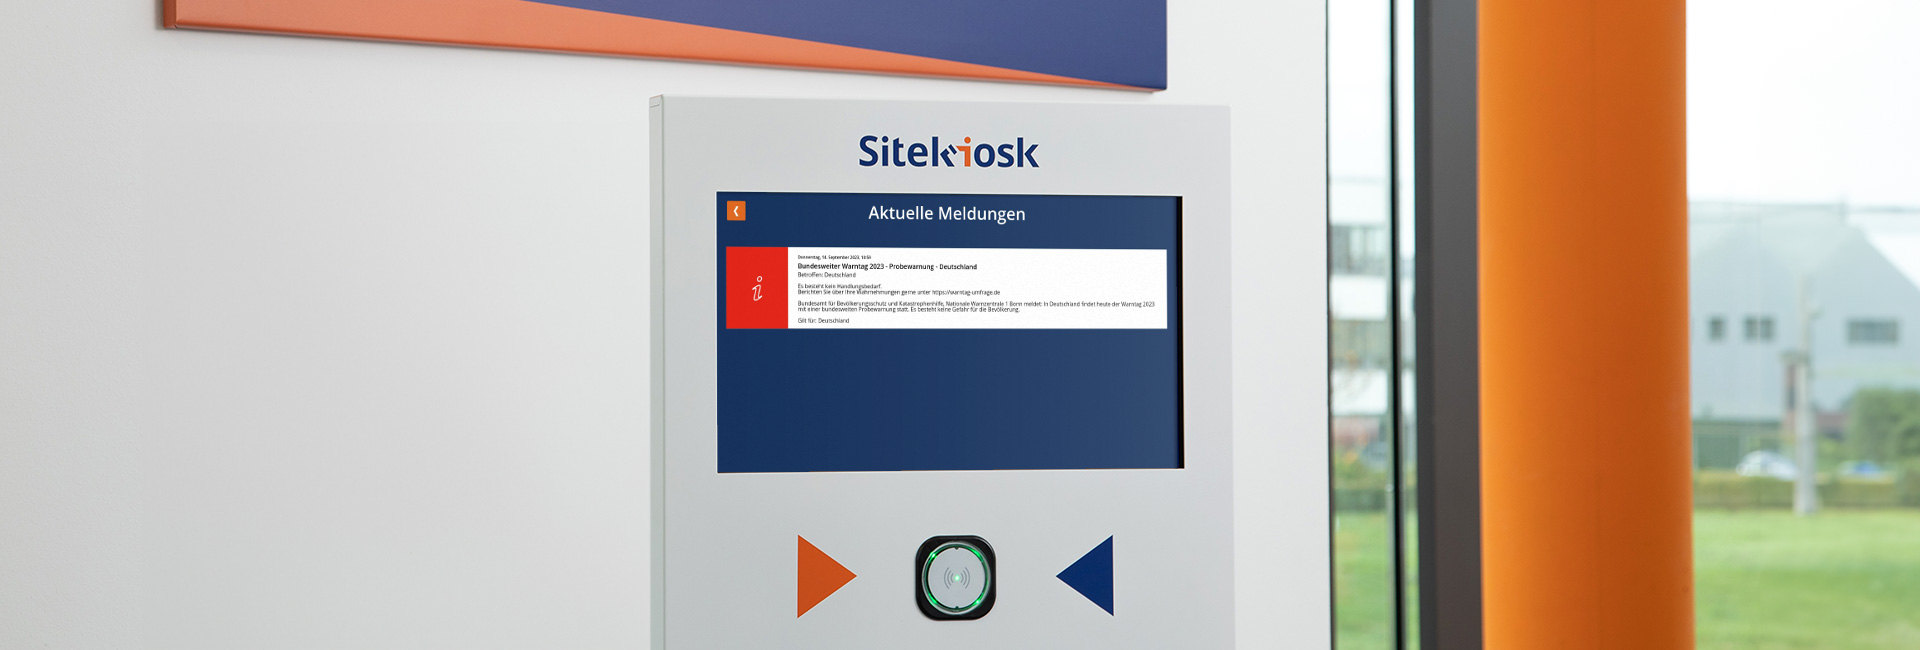 Civil protection with SiteKiosk Online